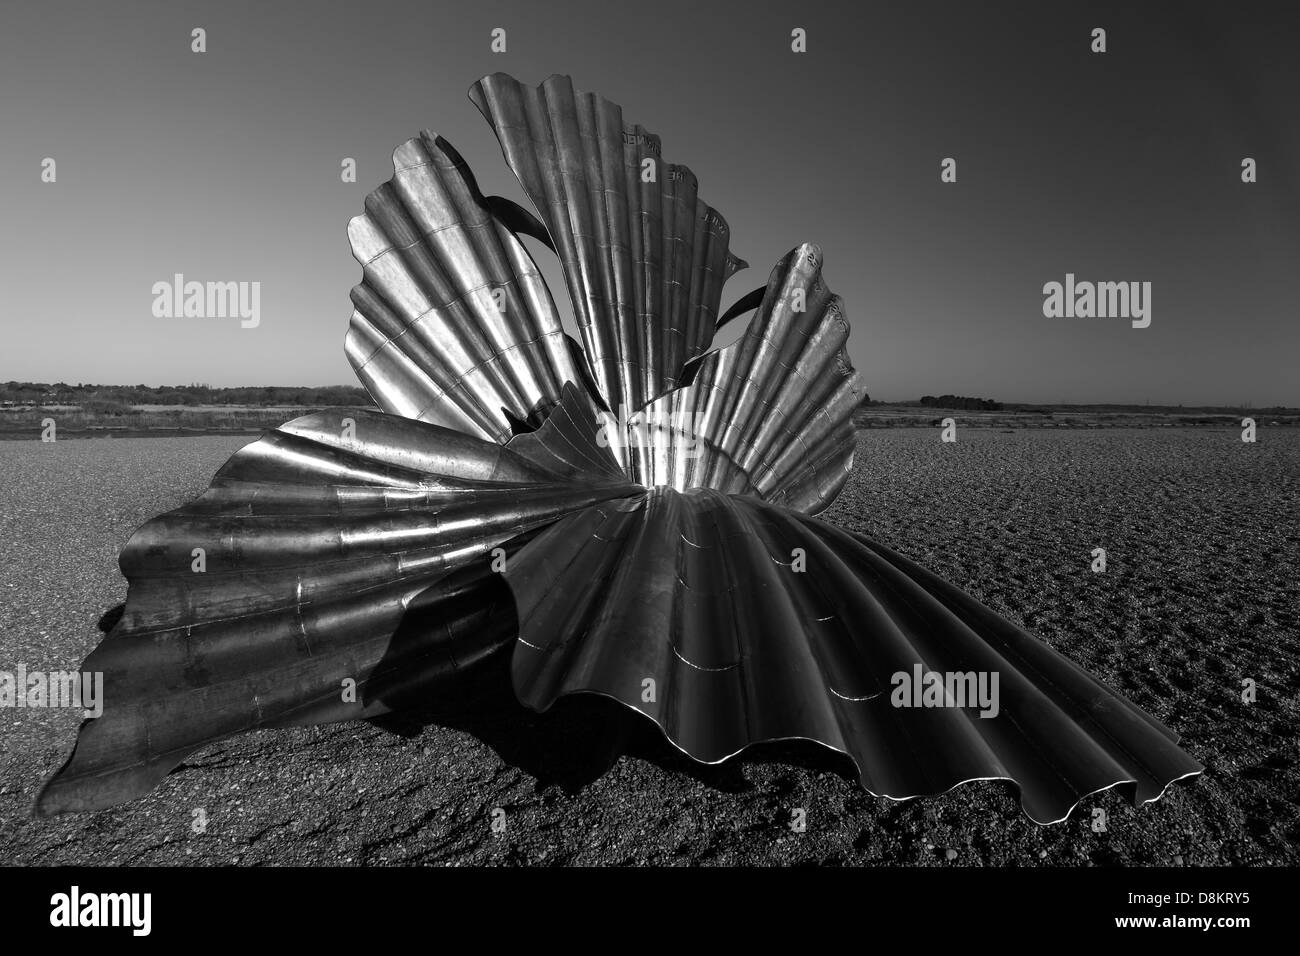 The Scallop shell sculpture by Maggie Hambling, on the beach, Aldeburgh town, Suffolk County, East Anglia, England. Stock Photo